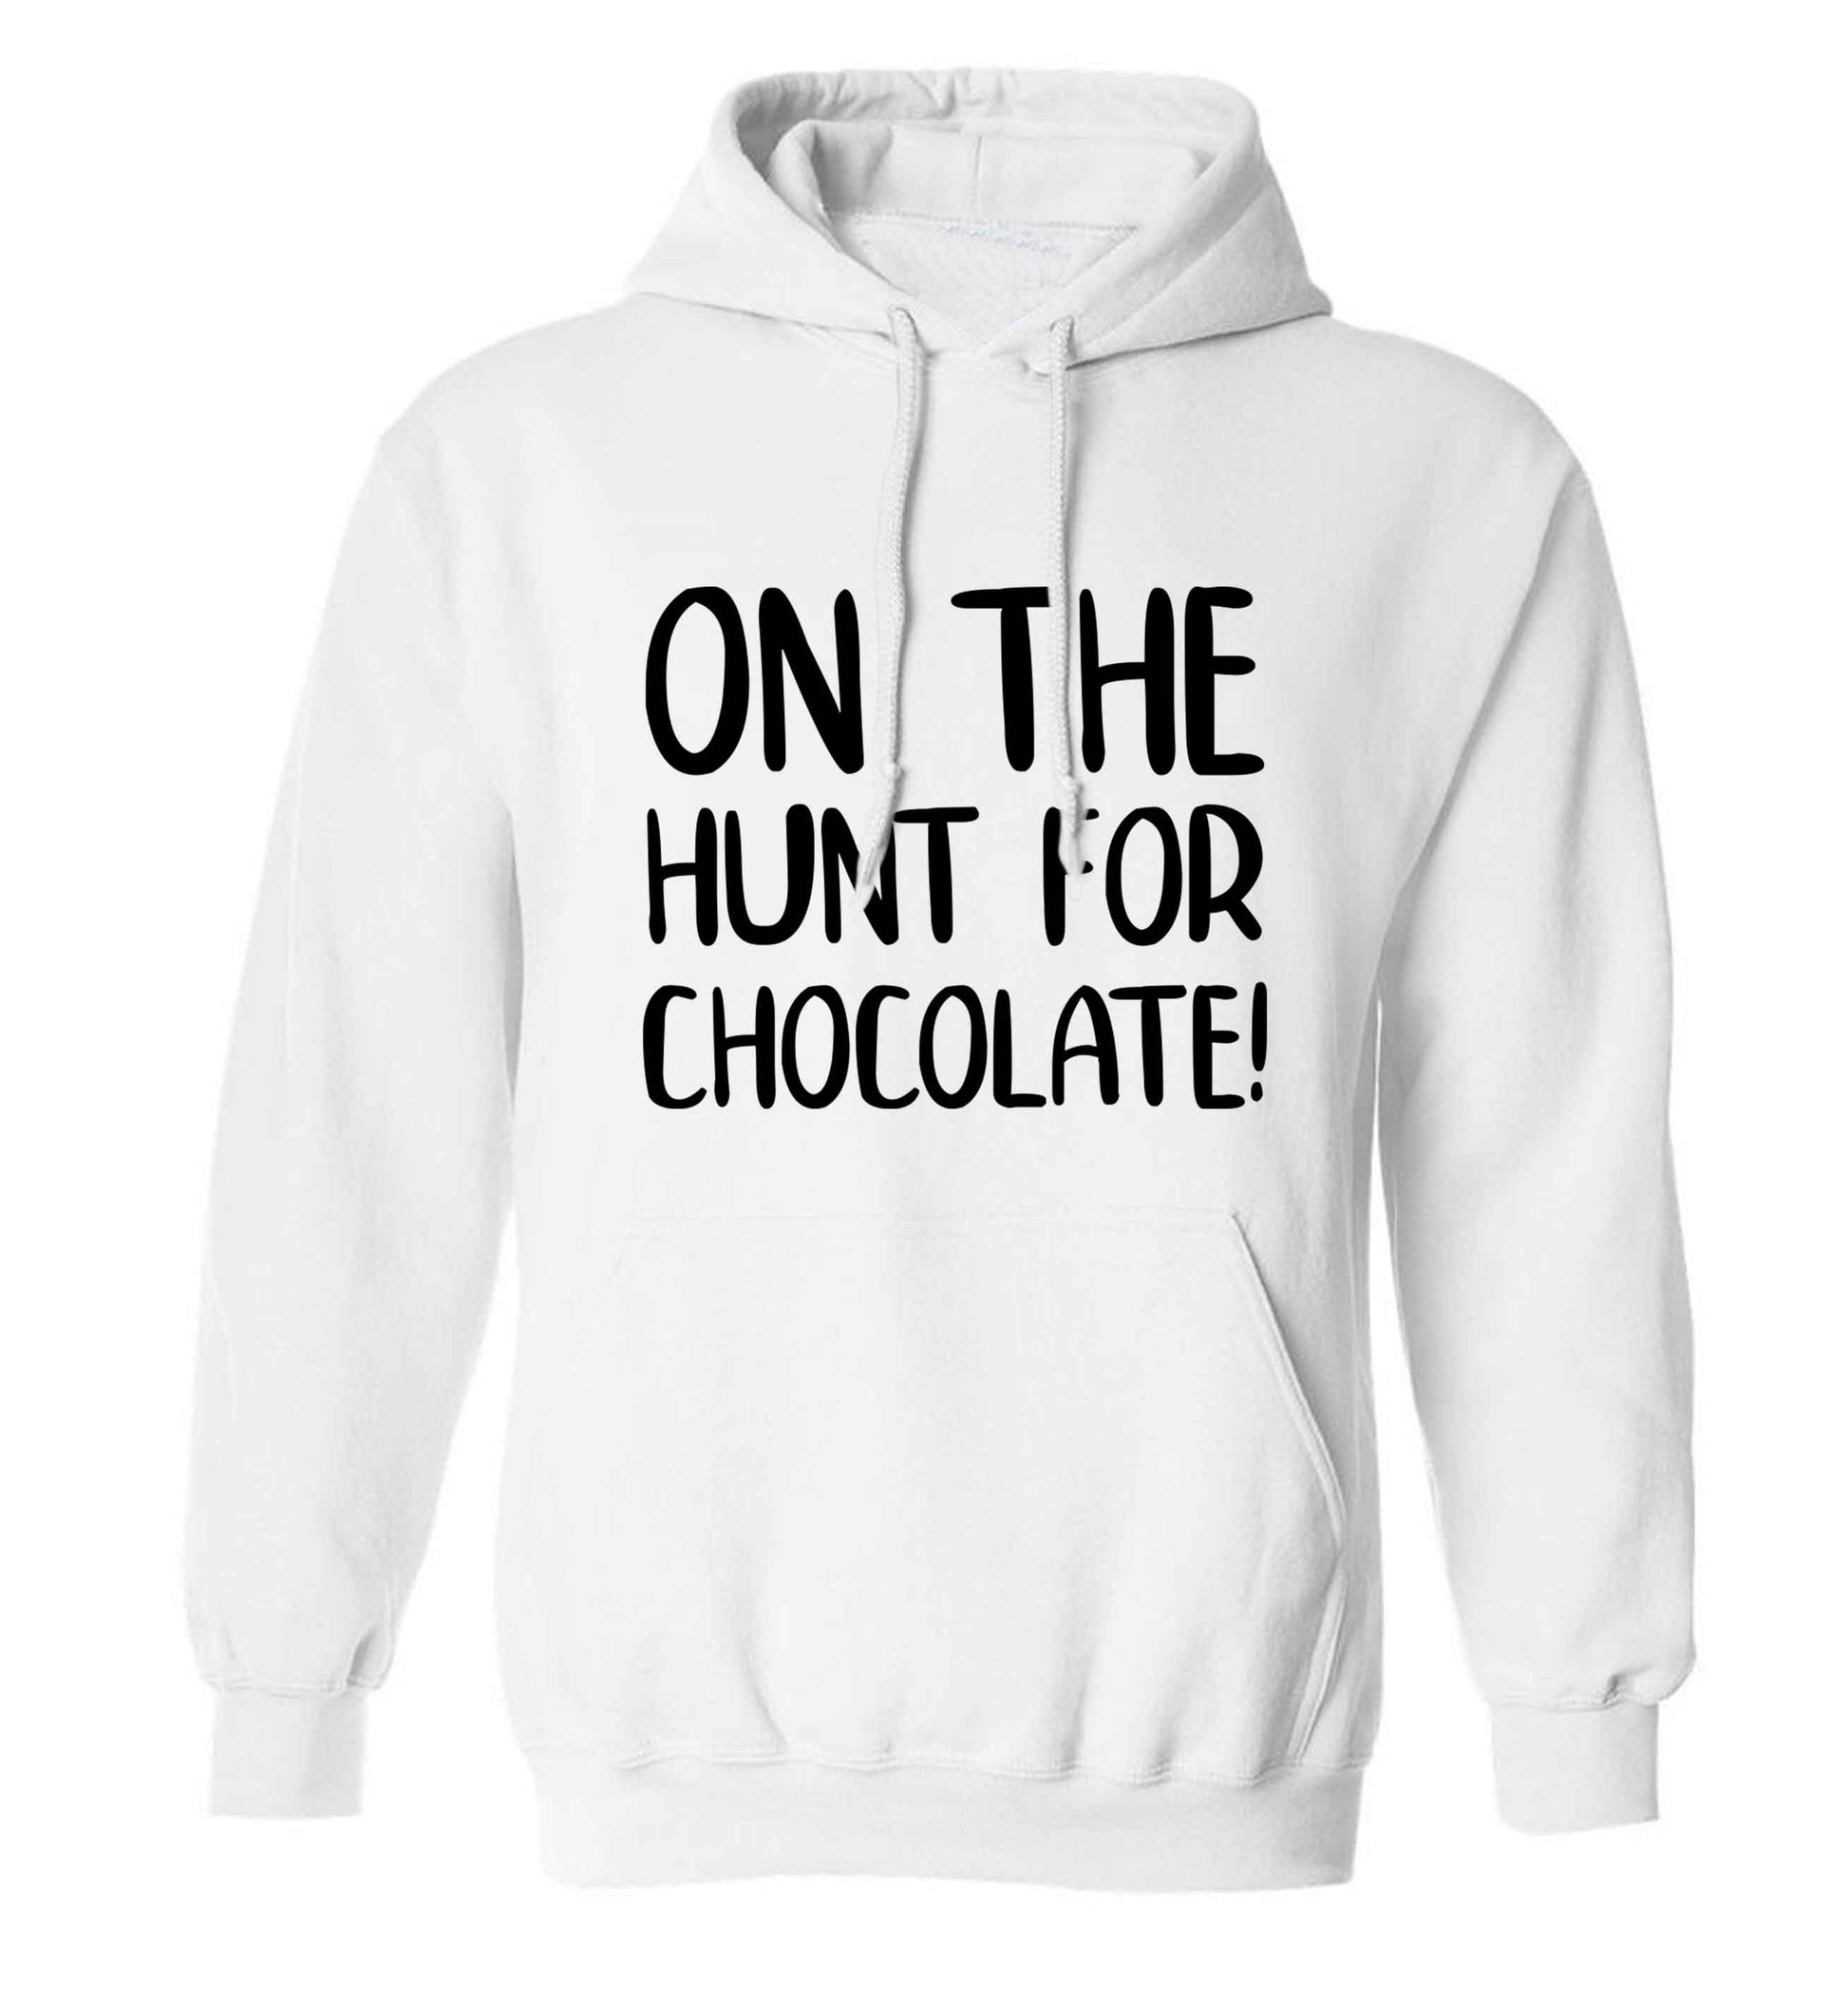 On the hunt for chocolate! adults unisex white hoodie 2XL